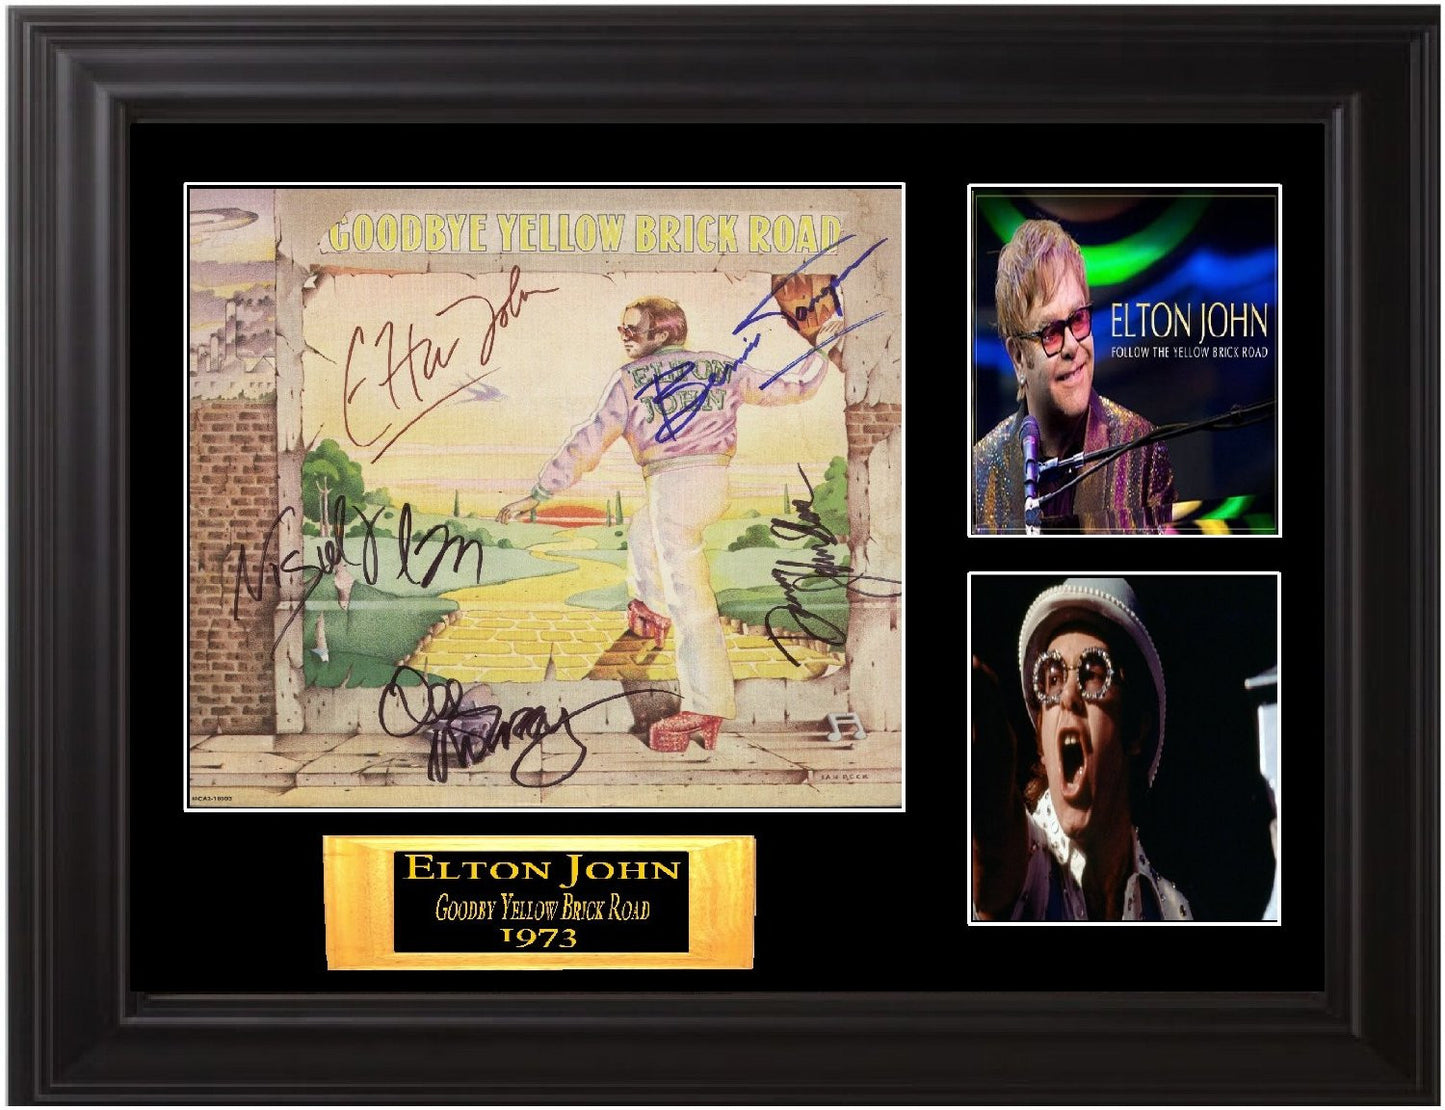 Elton John Framed Autographed Lp "Goodbye Yellow Brick Road" - Zion Graphic Collectibles